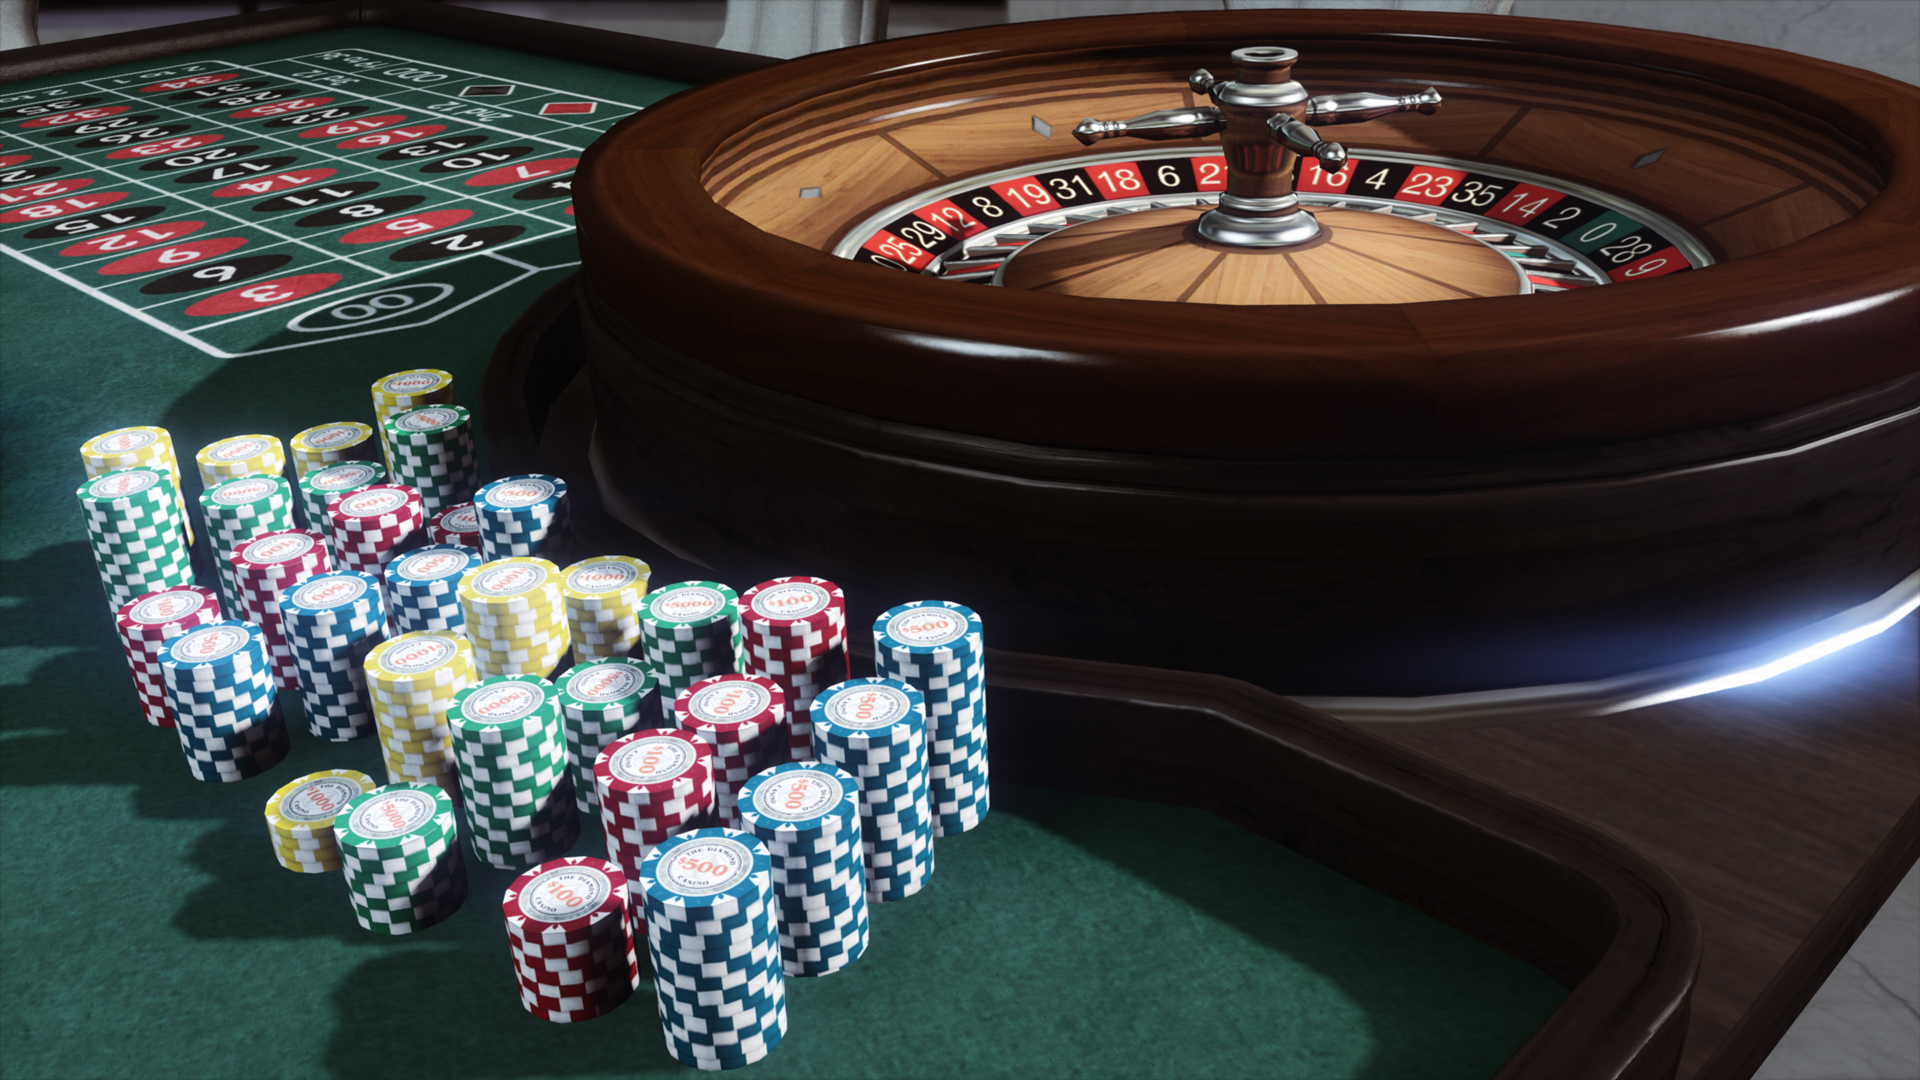 Mastering The Way Of The best Online Casino Is Not An Accident - It's An Art